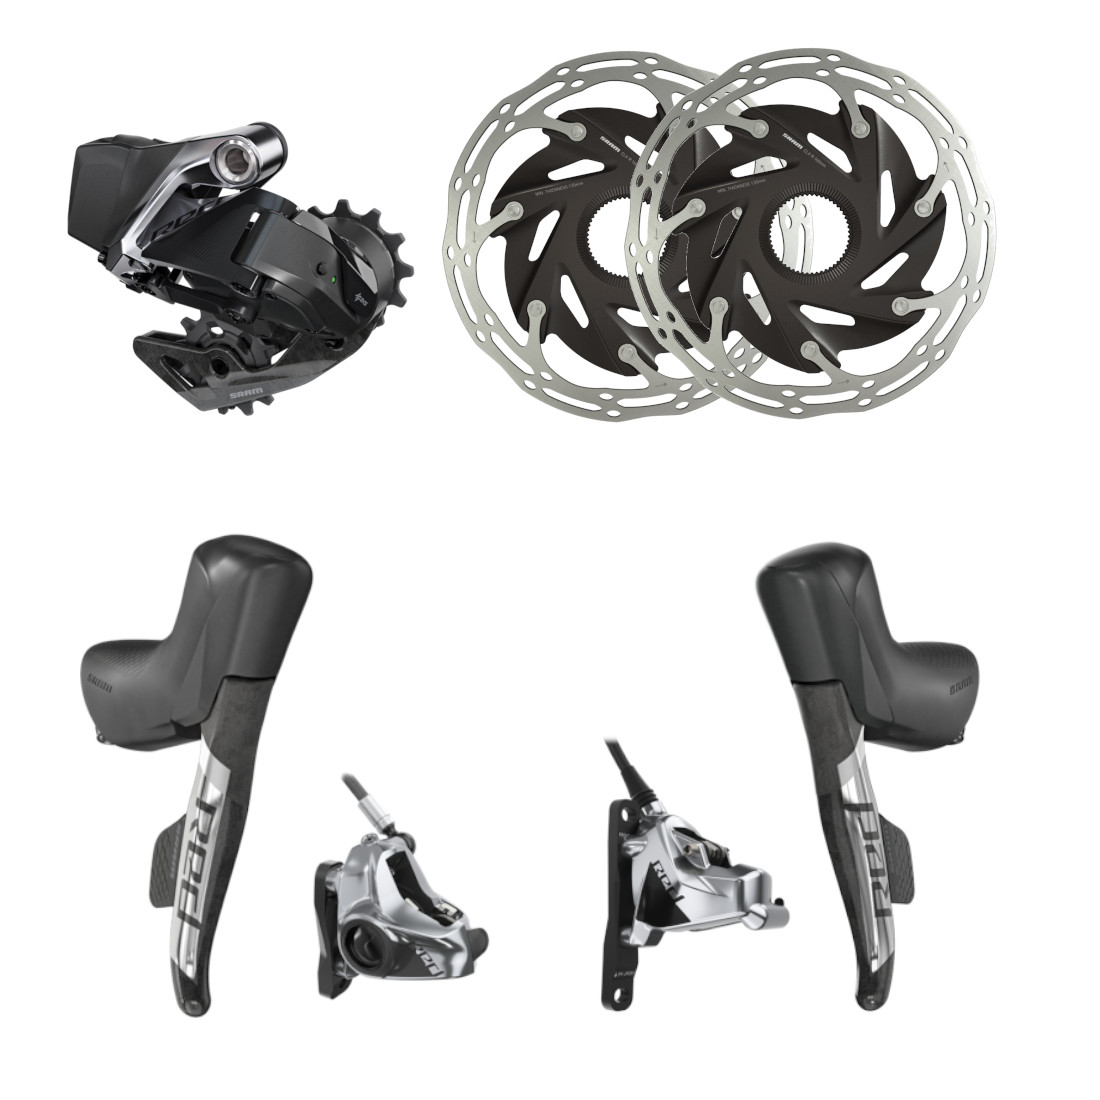 Picture of SRAM RED eTap AXS HRD 1x12 Upgrade Set with Hydraulic Disc Brakes - Flat Mount - Centerlock